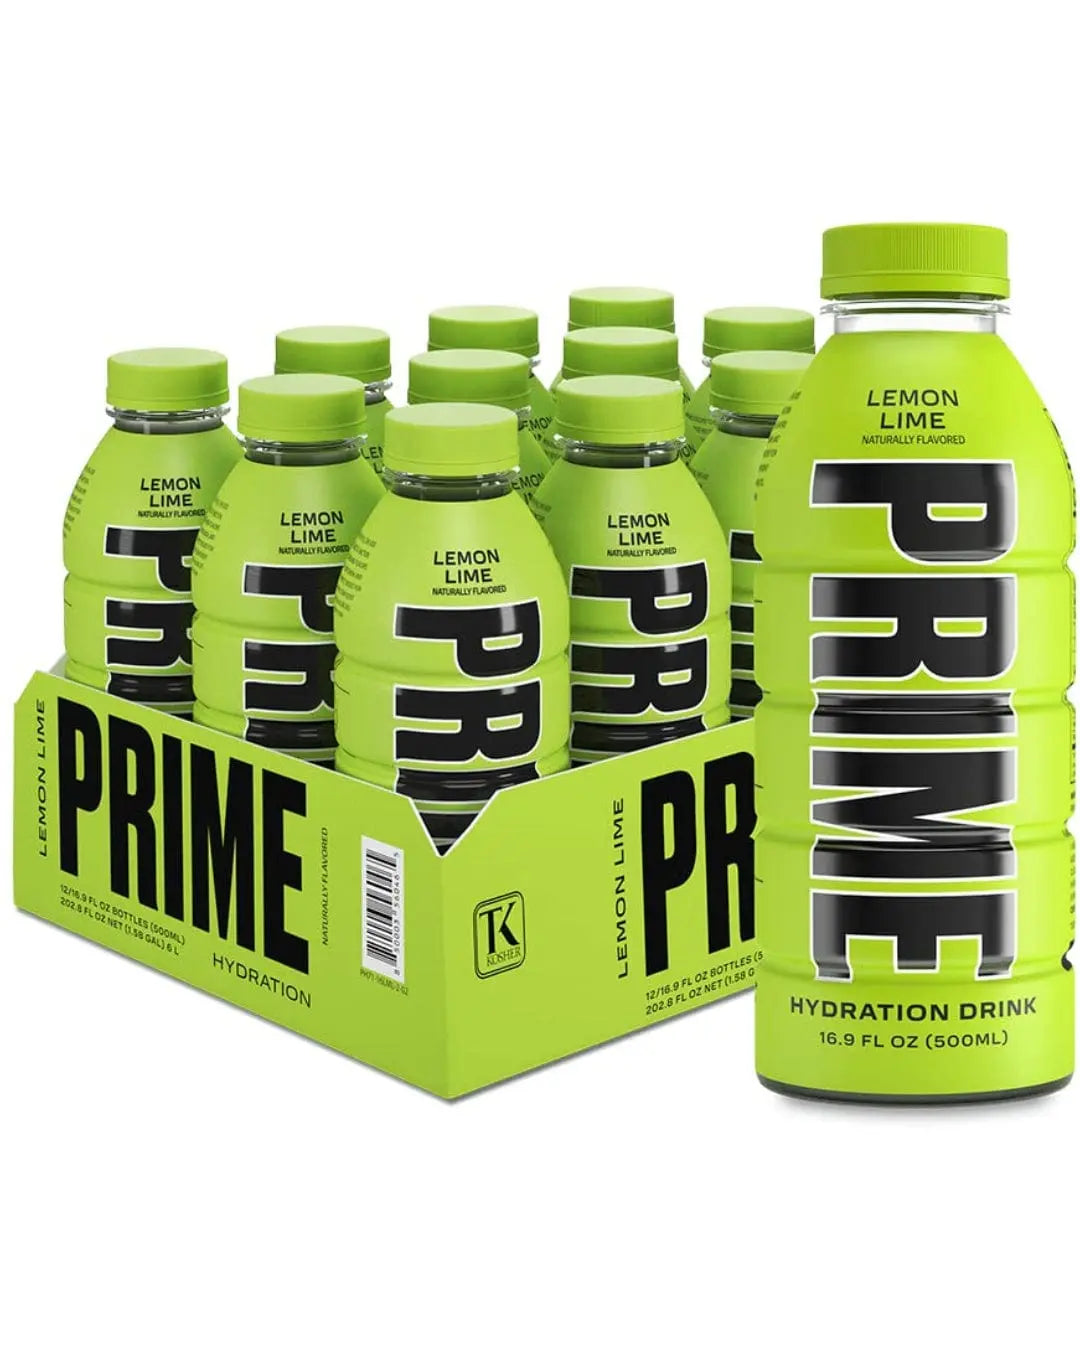 Prime Lemon Lime Hydration Drink Multipack, 12 x 500 ml Soft Drinks & Mixers 810116120529